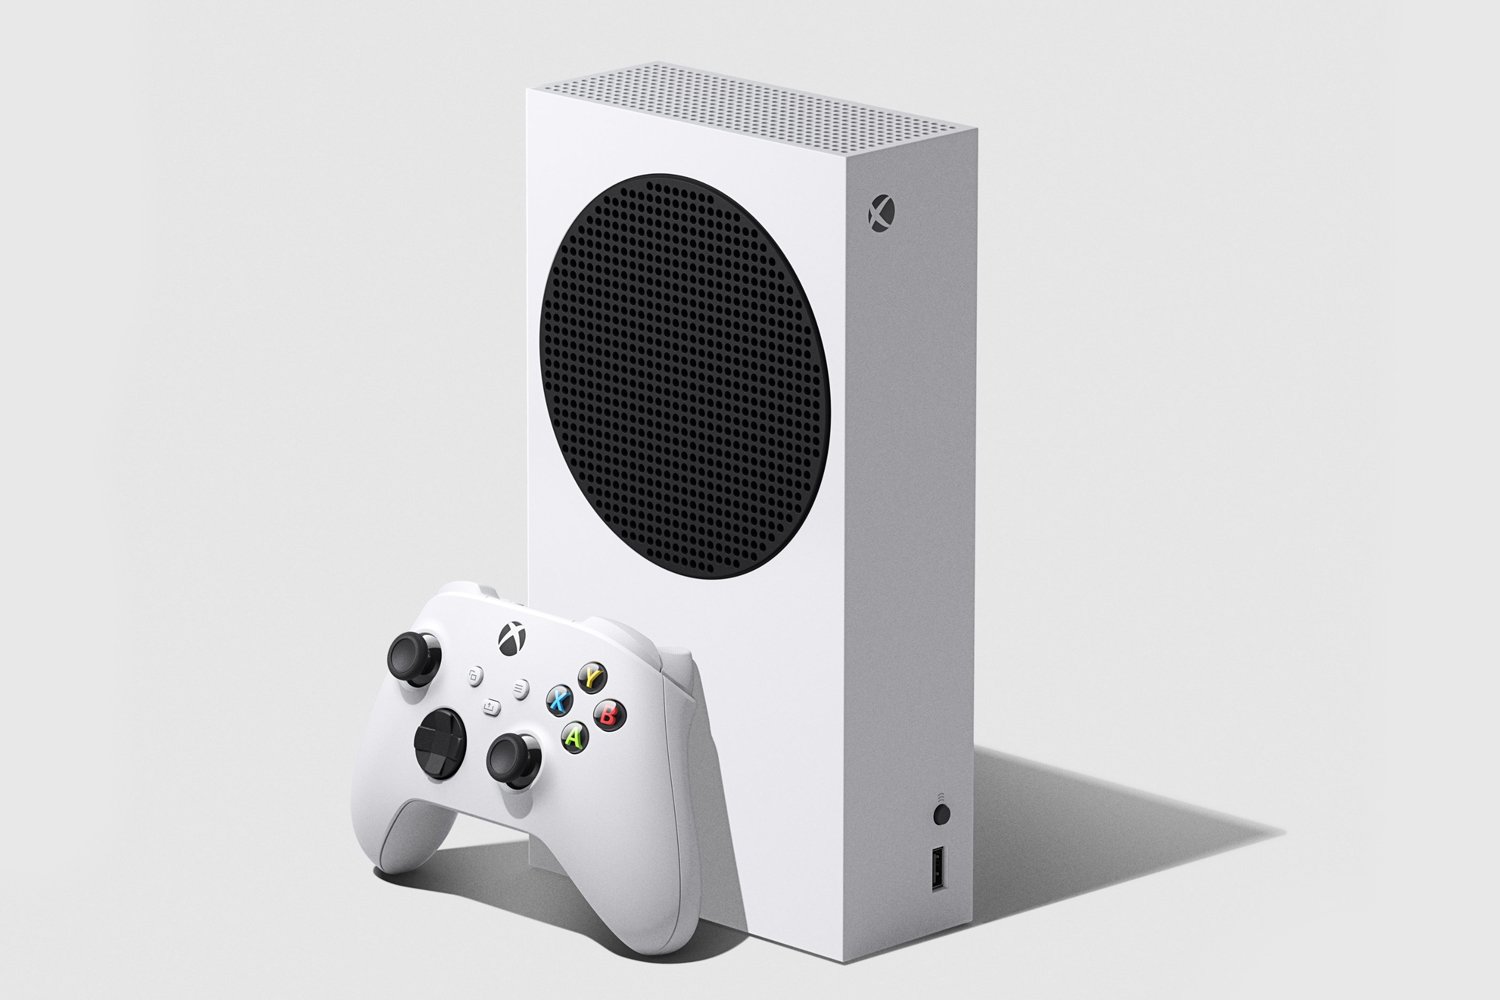 Microsoft Xbox Series S 512GB SSD Console White - Includes Xbox Wireless  Controller - Up to 120 frames per second - 10GB RAM 512GB SSD - Experience